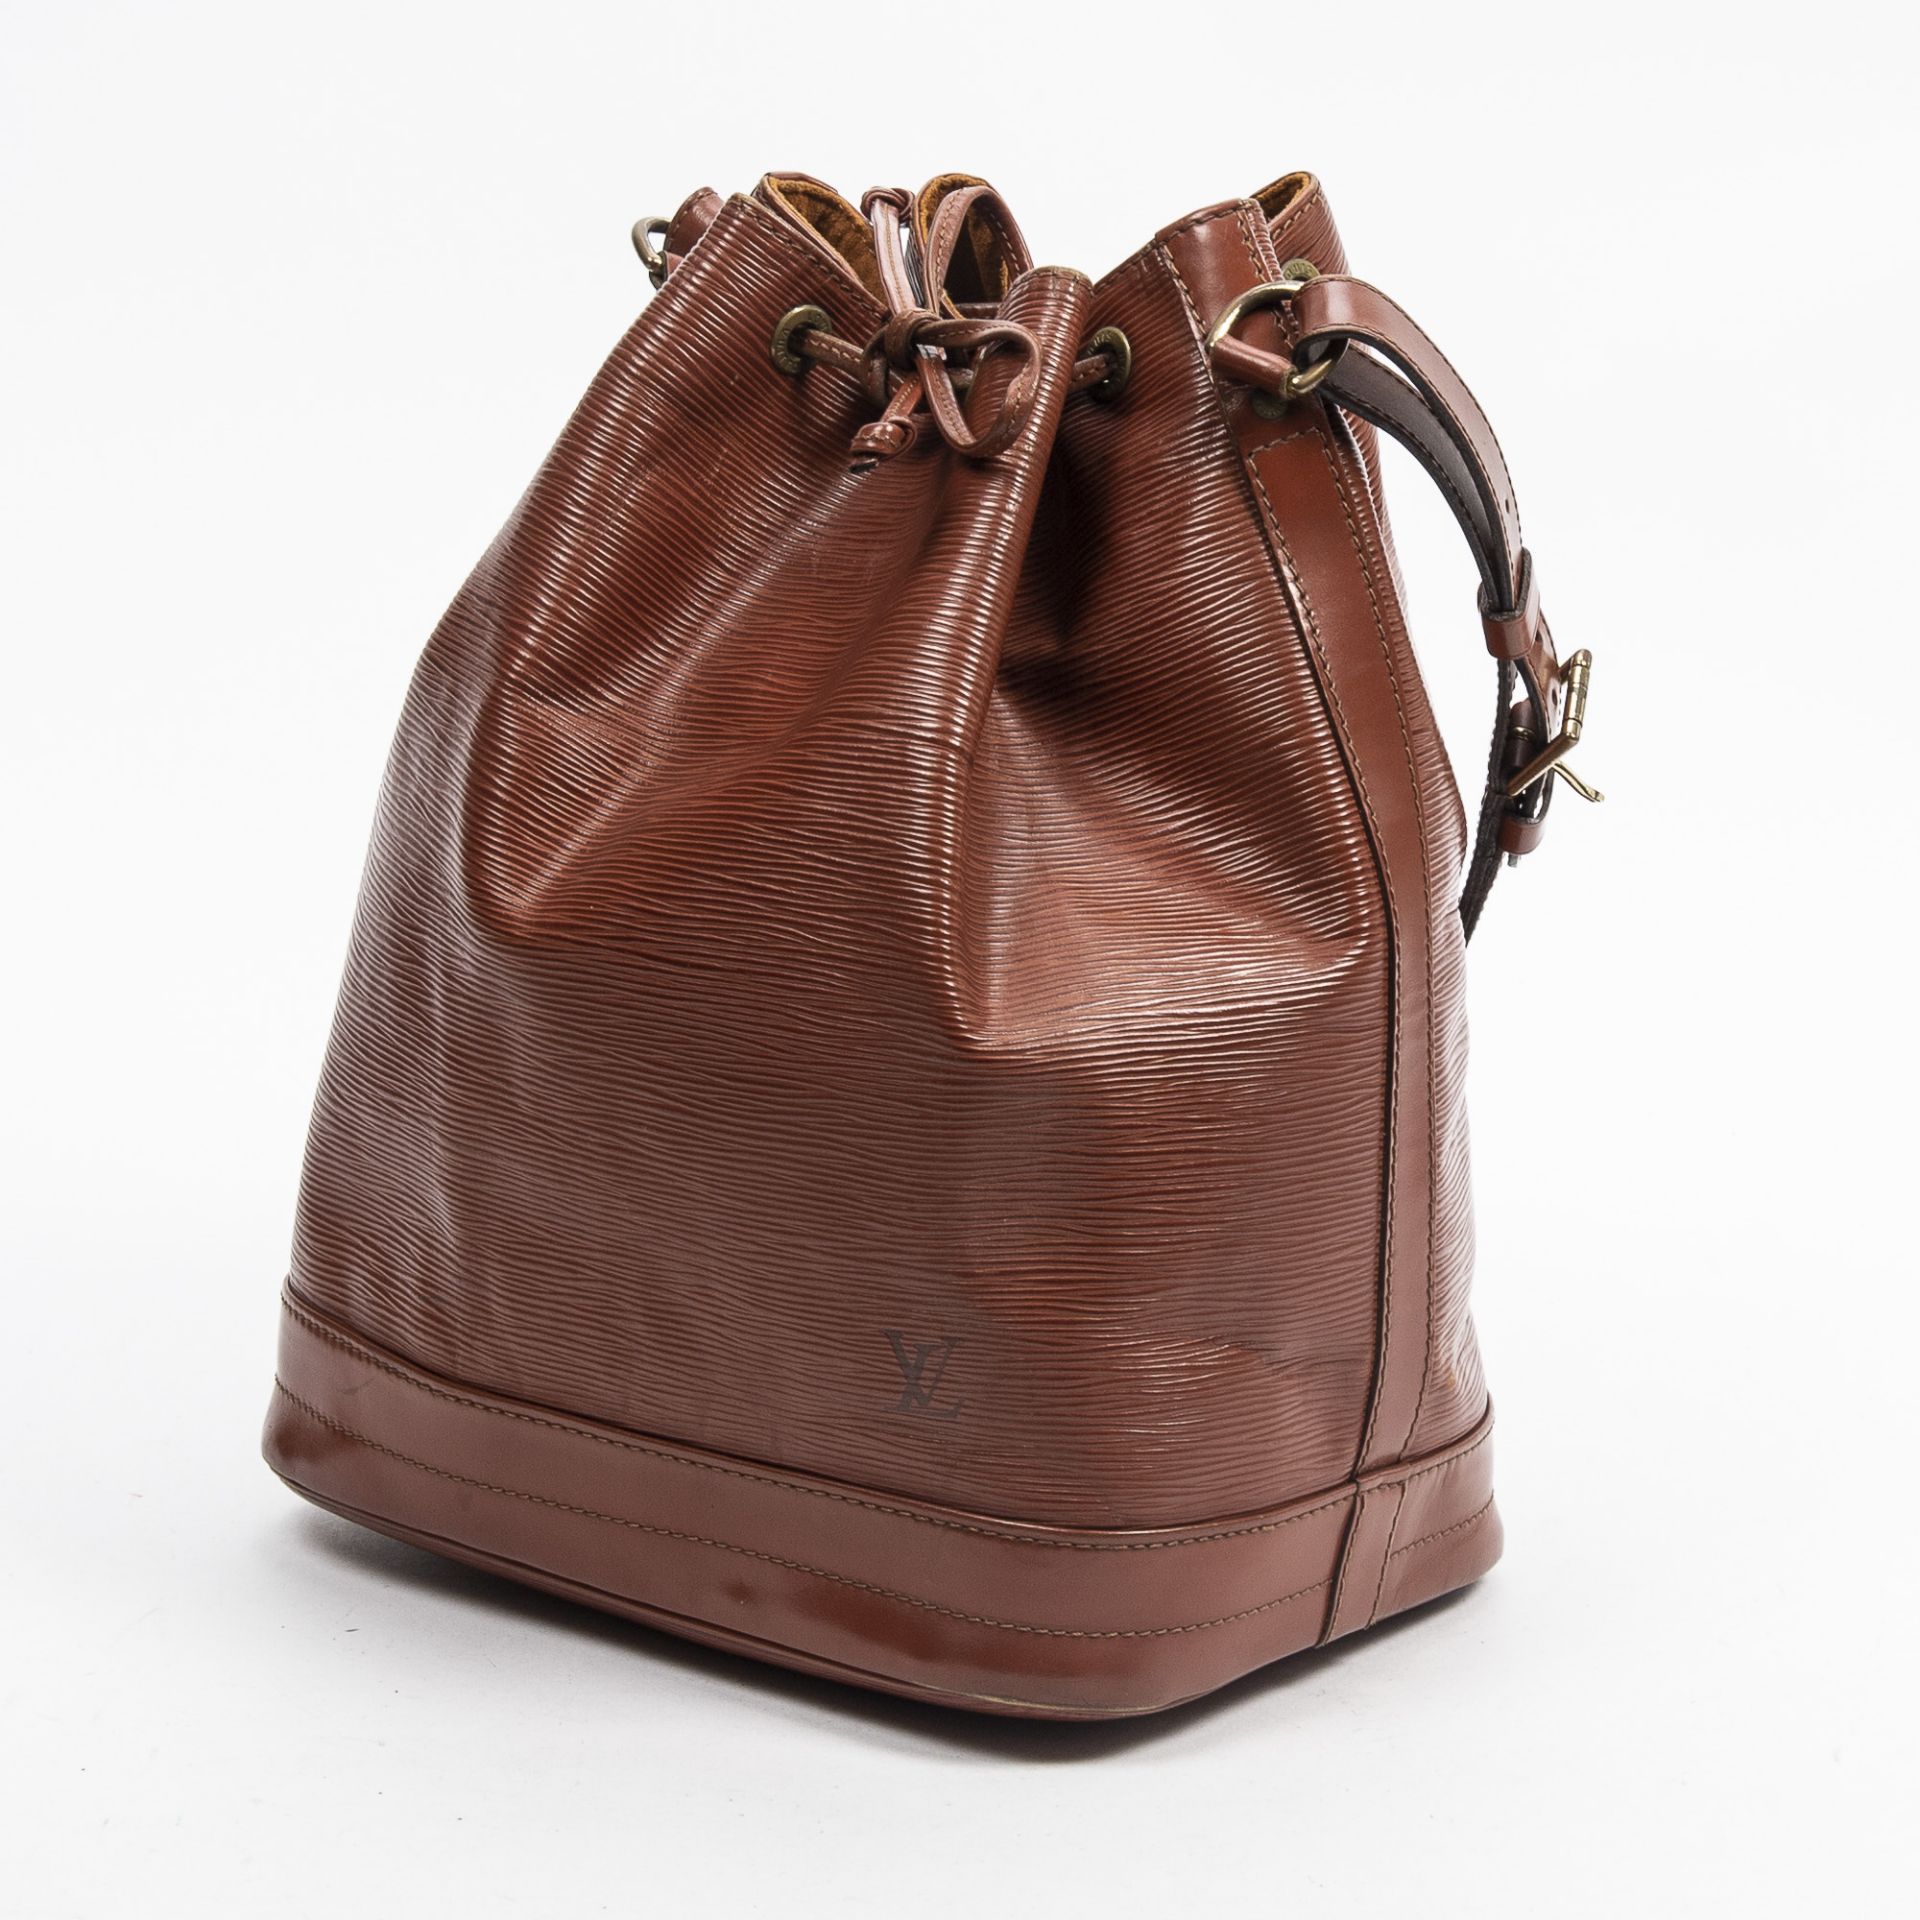 RRP £1,700.00 Lot To Contain 1 Louis Vuitton Calf Leather Noe Shoulder Bag In Tan - 27*34*16cm - - Image 2 of 3